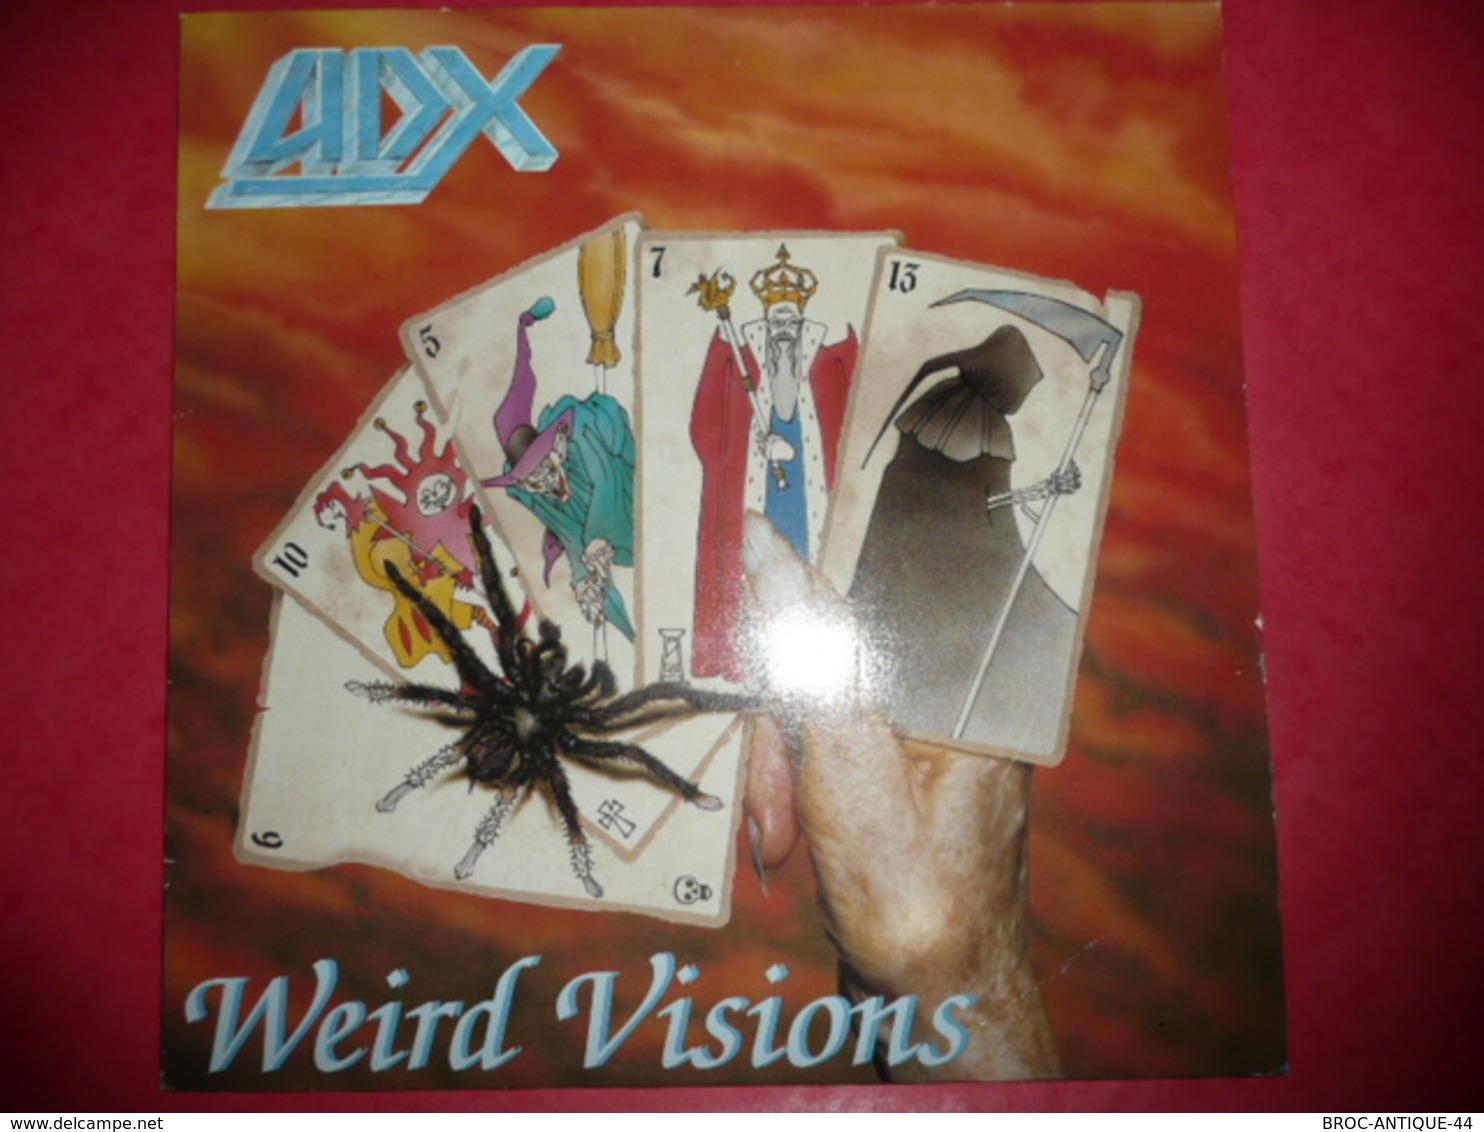 LP33 N°159 - ADX - WEIRD VISIONS - COMPILATION 10 TITRES - Hard Rock & Metal